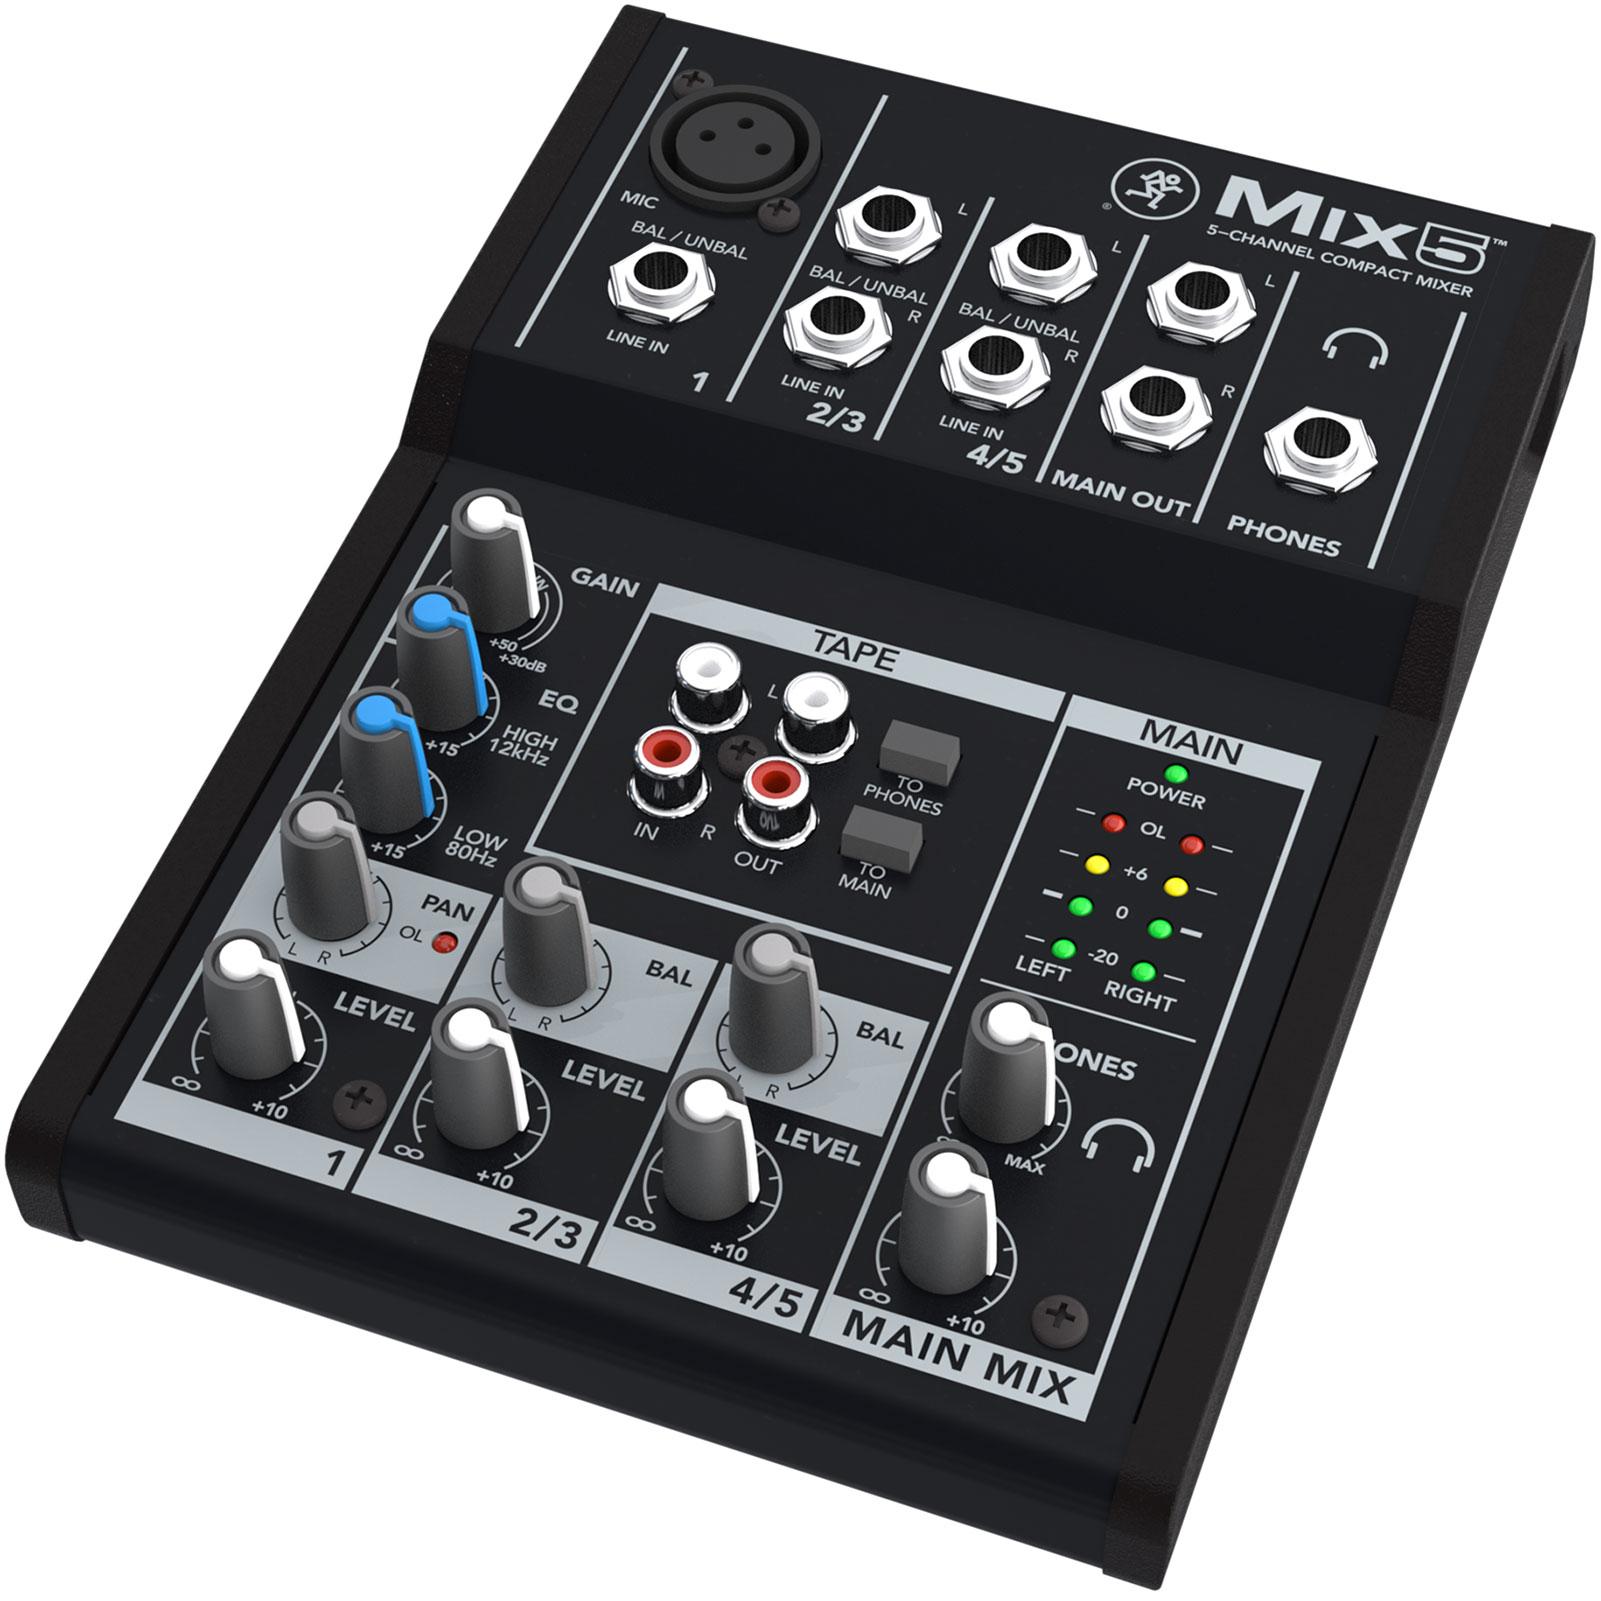 Photos - Mixing Desk Mackie Mix5 5-Channel Compact Mixer 